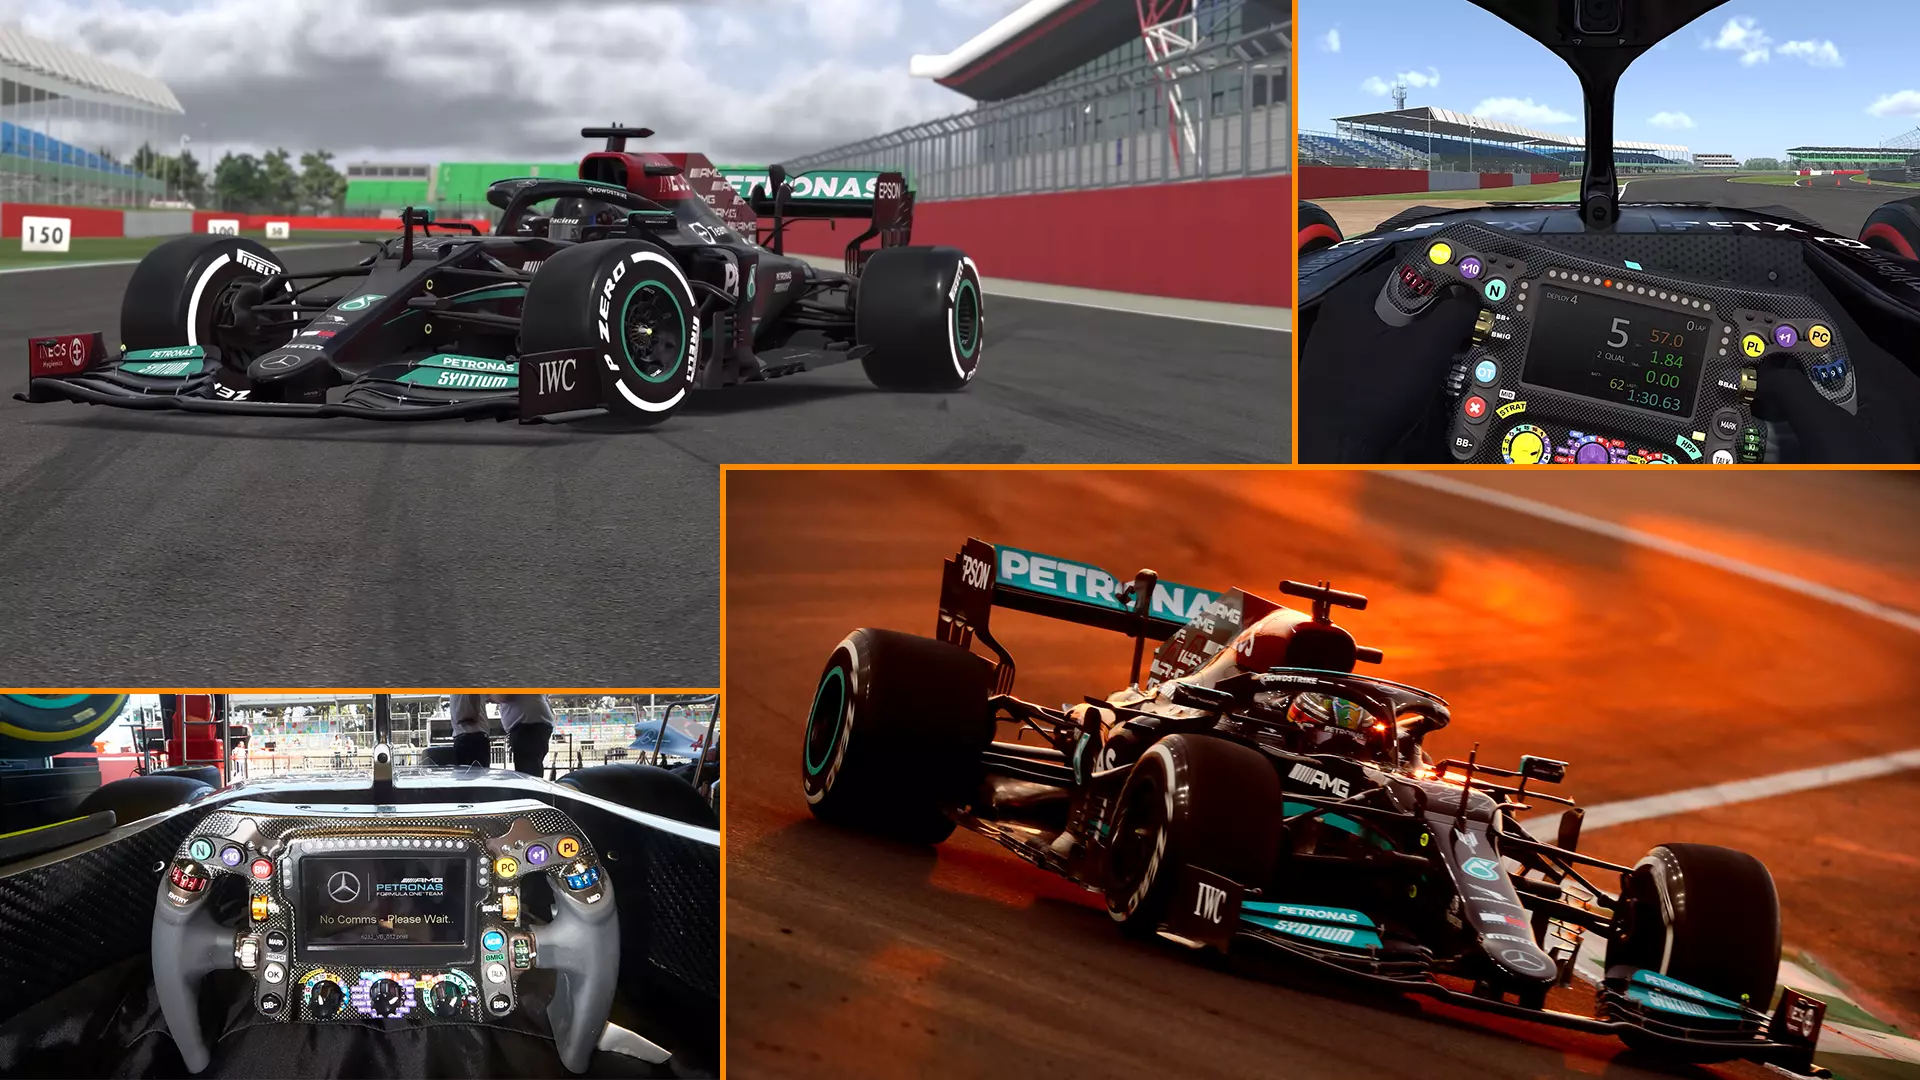 Why iRacing’s Factory-Supported Mercedes F1 Car Is Such a Big Deal for Sim Racing